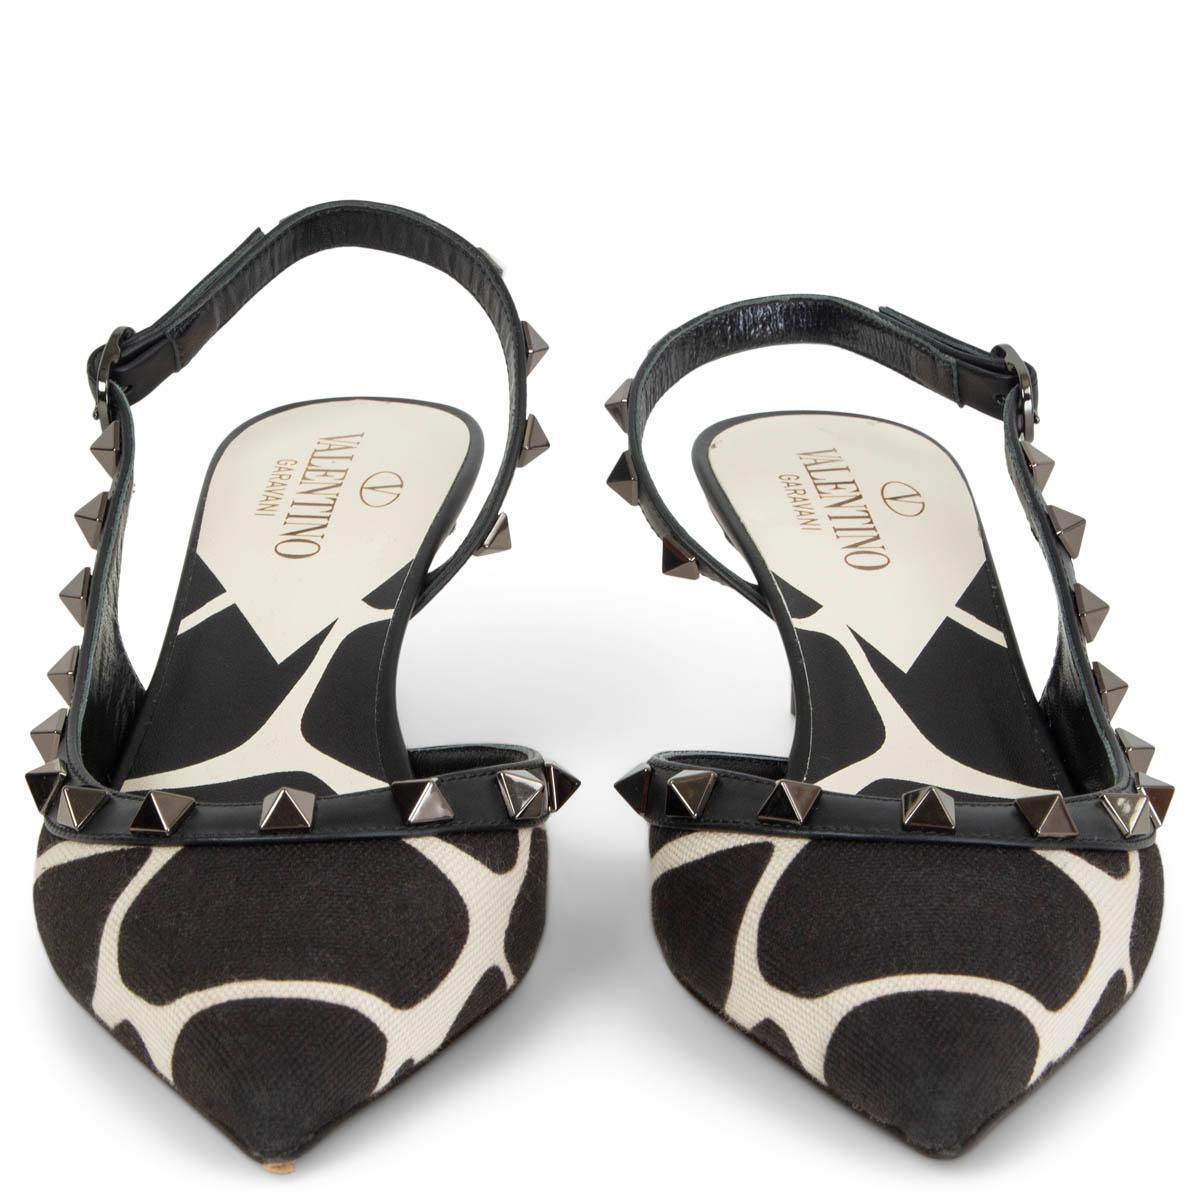 100% authentic Valentino Rockstud d'Orsay slingback pumps in black and white giraffe print canvas with leather trim and signature pyramid rockstuds in gunmetal. Brand new. Come with dust bag. 

Measurements
Imprinted Size	36
Shoe Size	36
Inside